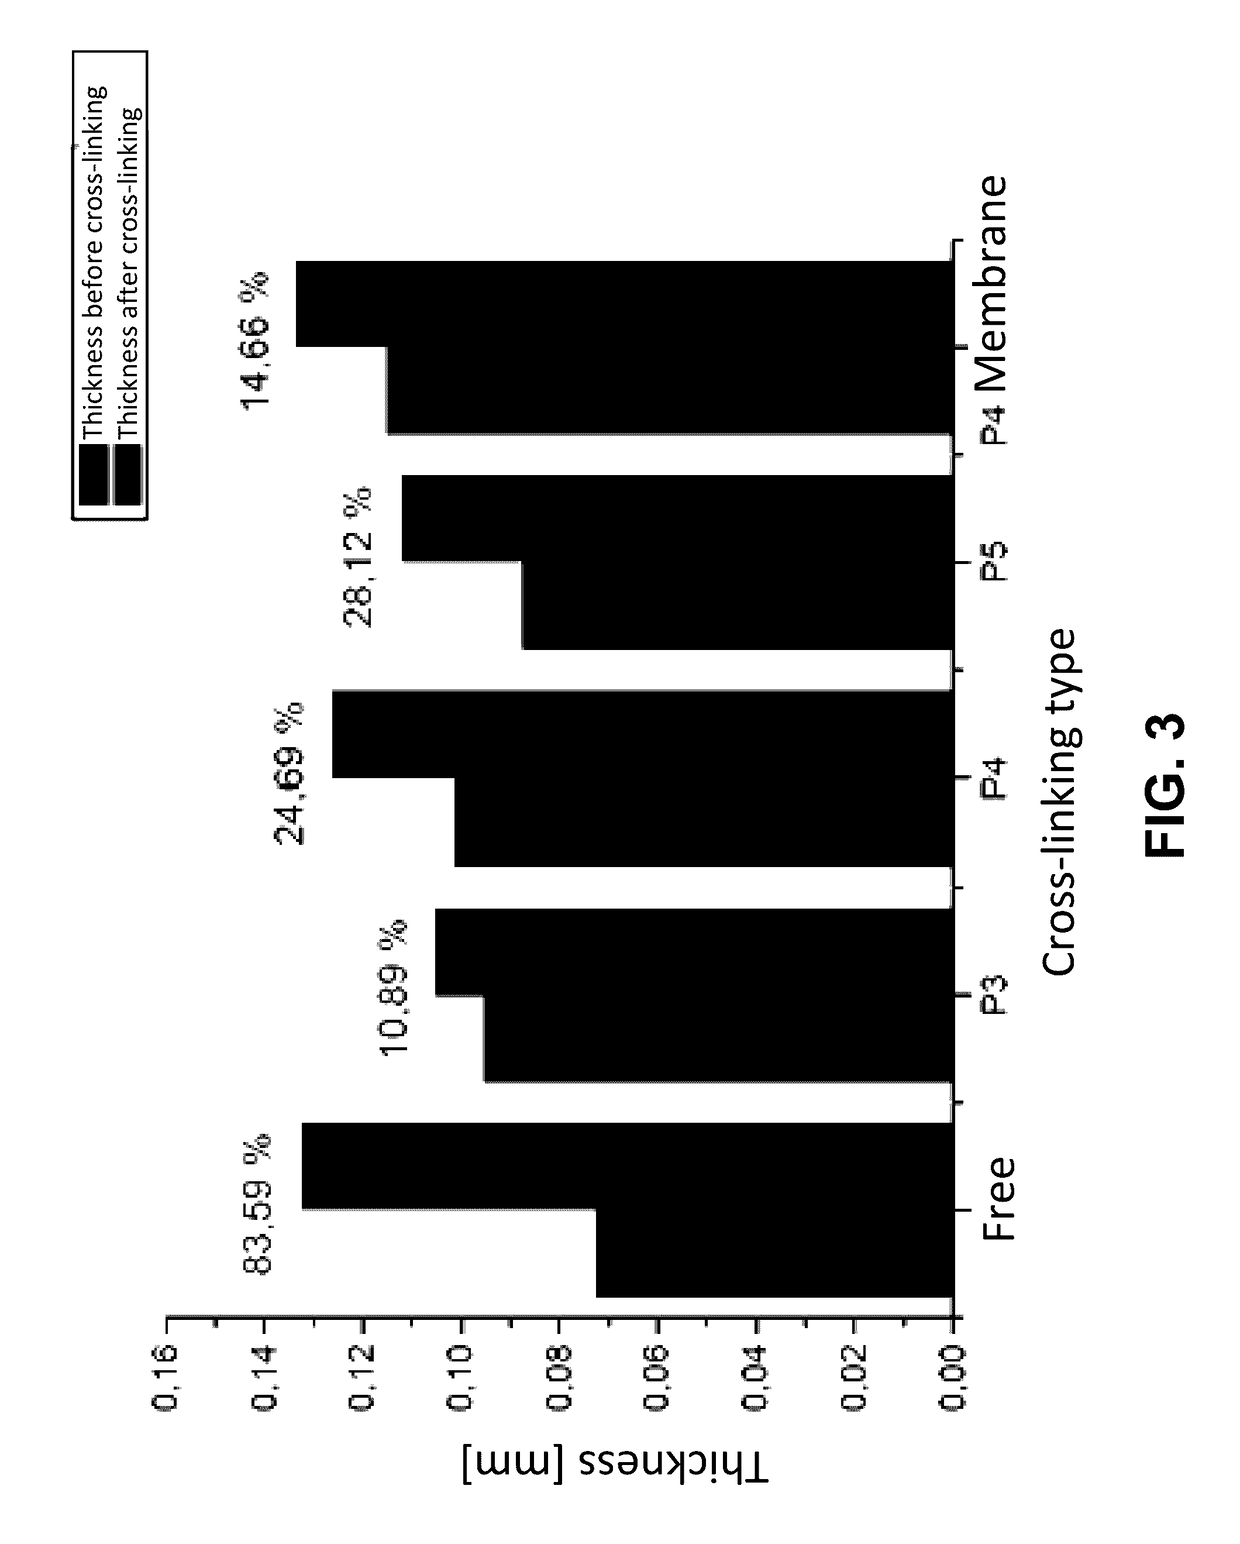 Method for reducing paravalvular leaks with decellularized tissue